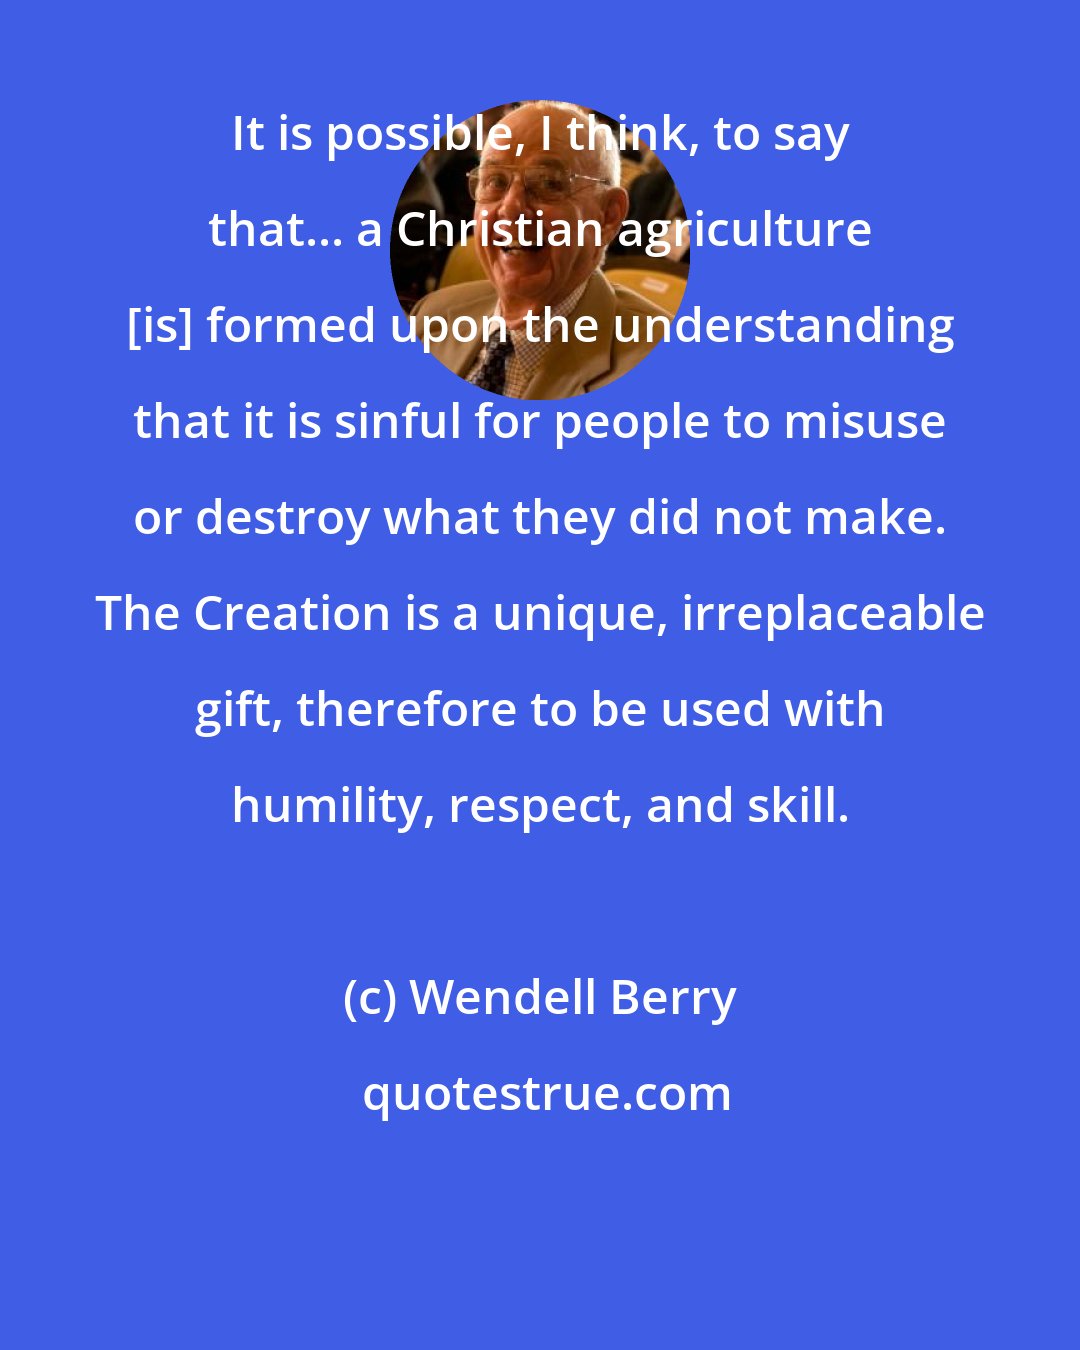 Wendell Berry: It is possible, I think, to say that... a Christian agriculture [is] formed upon the understanding that it is sinful for people to misuse or destroy what they did not make. The Creation is a unique, irreplaceable gift, therefore to be used with humility, respect, and skill.